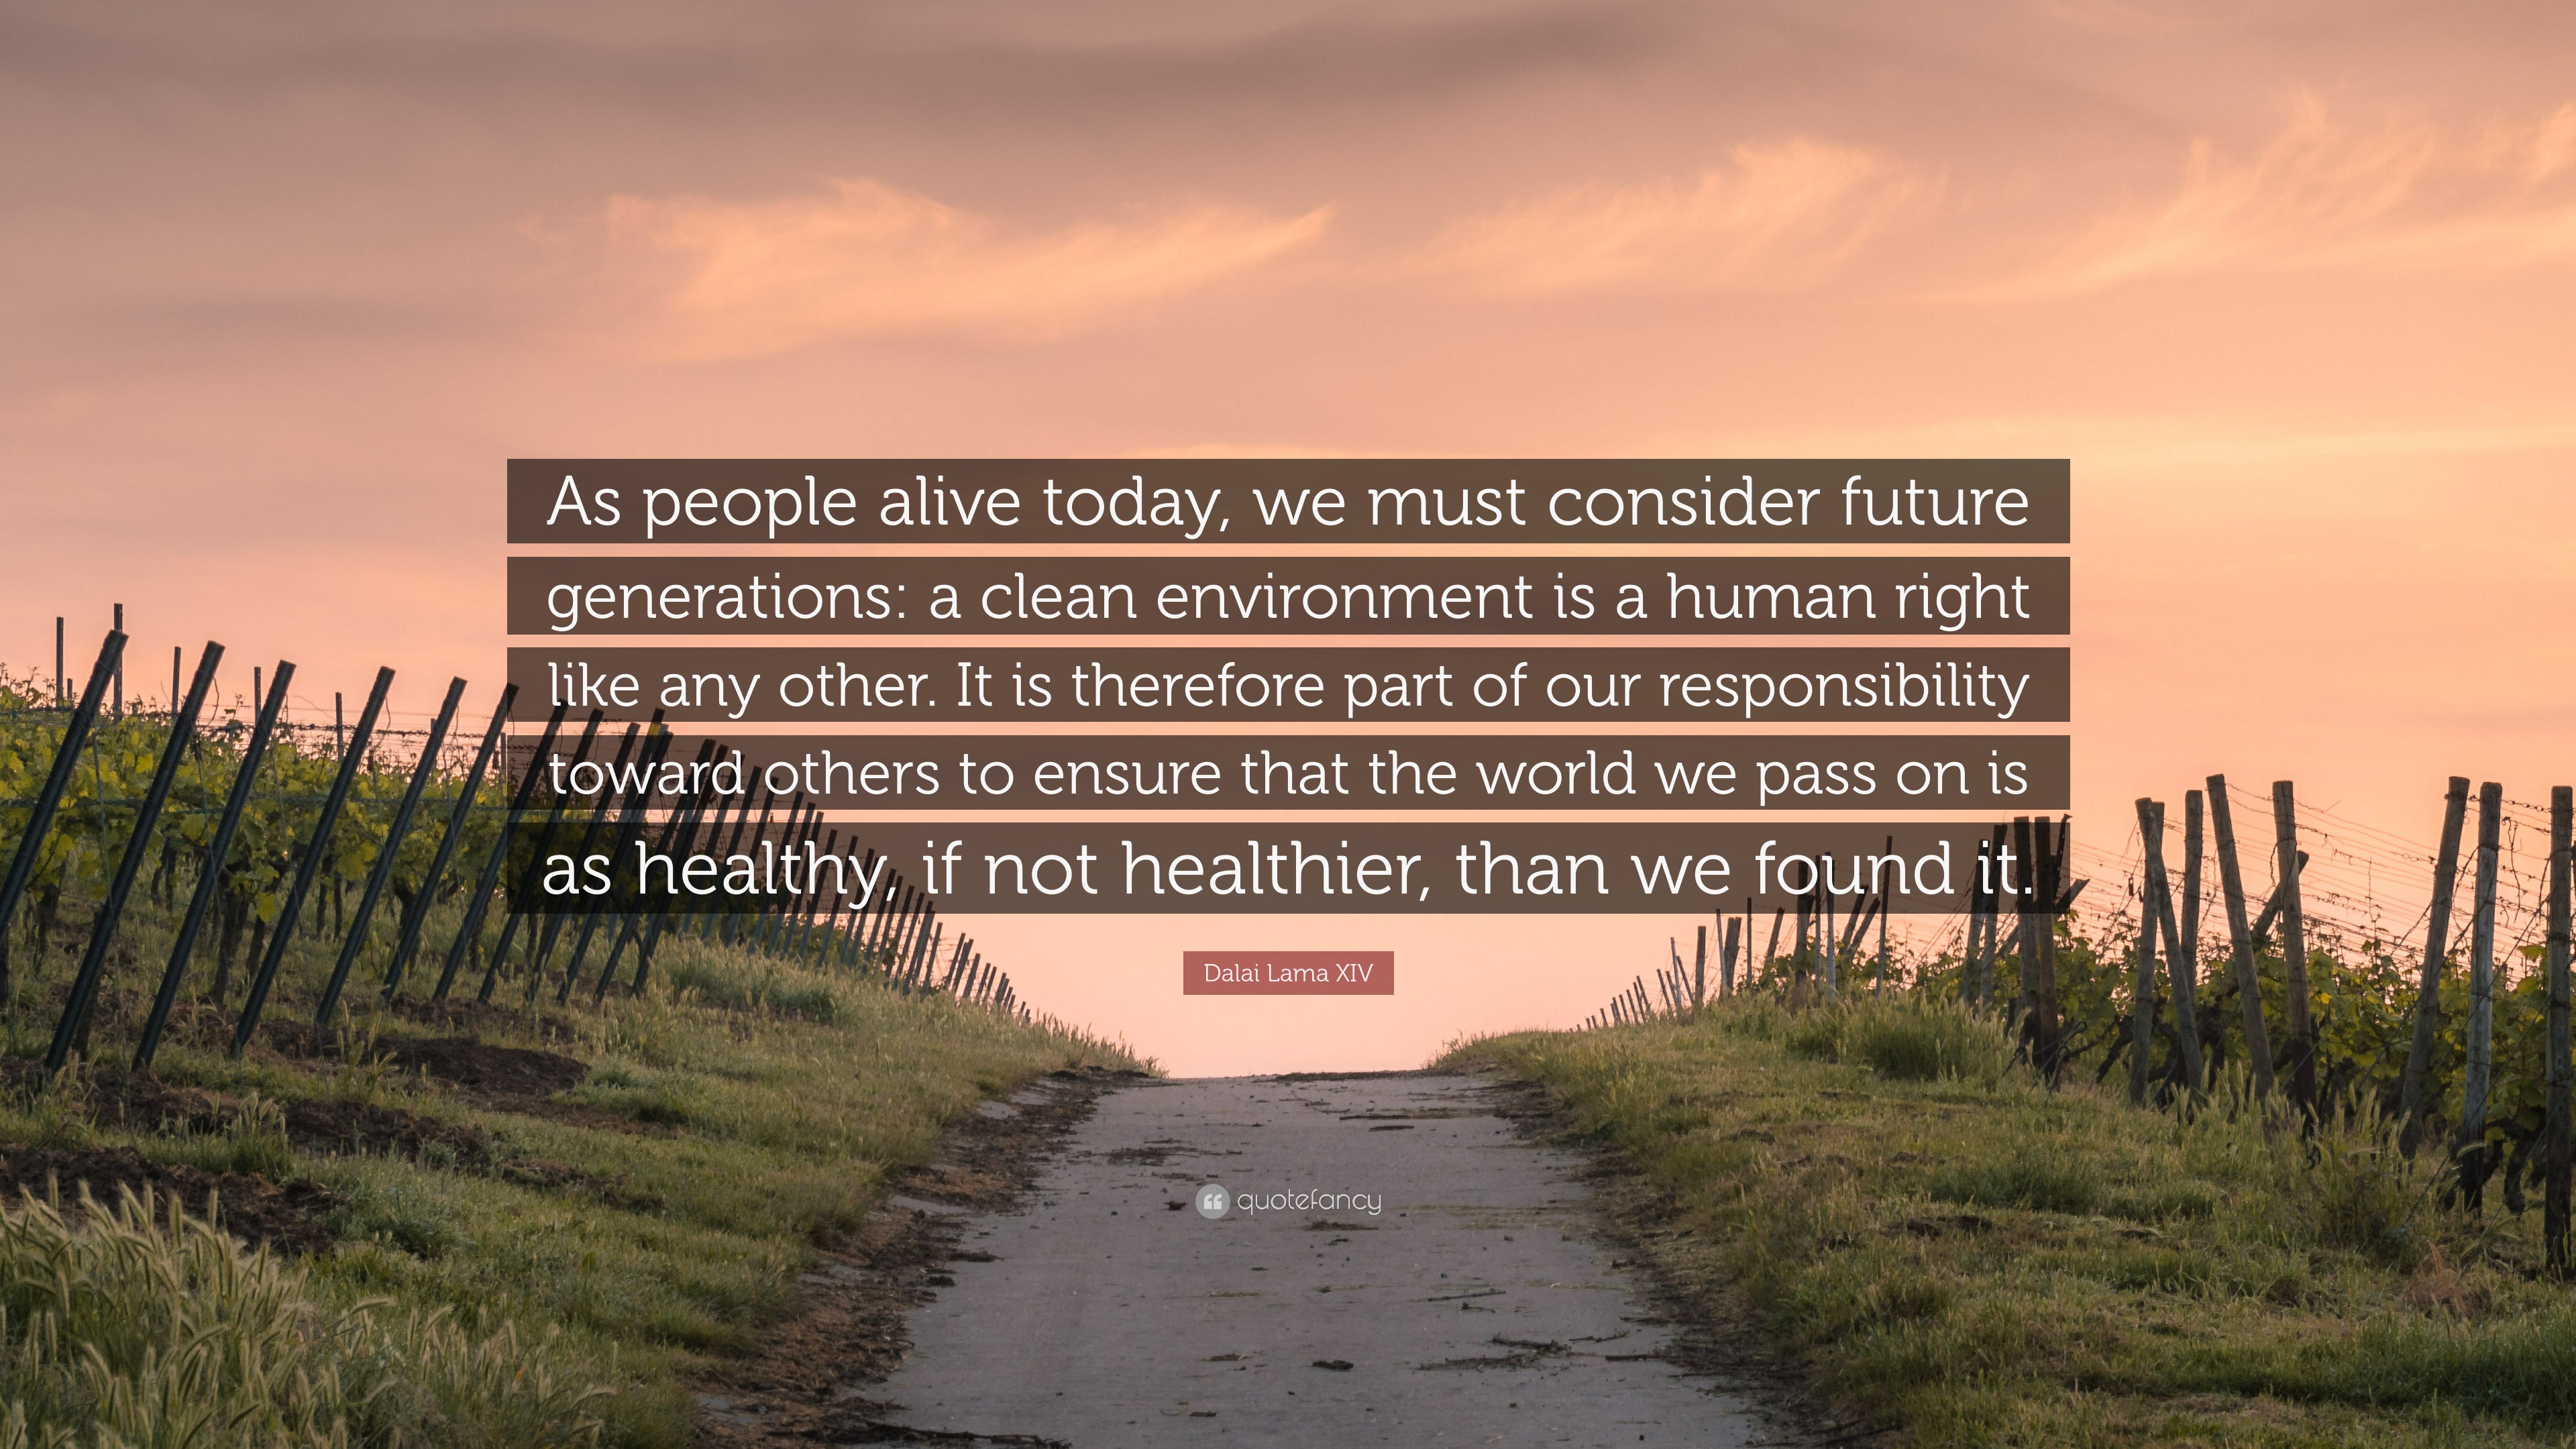 Dalai Lama XIV Quote: “As people alive today, we must consider future